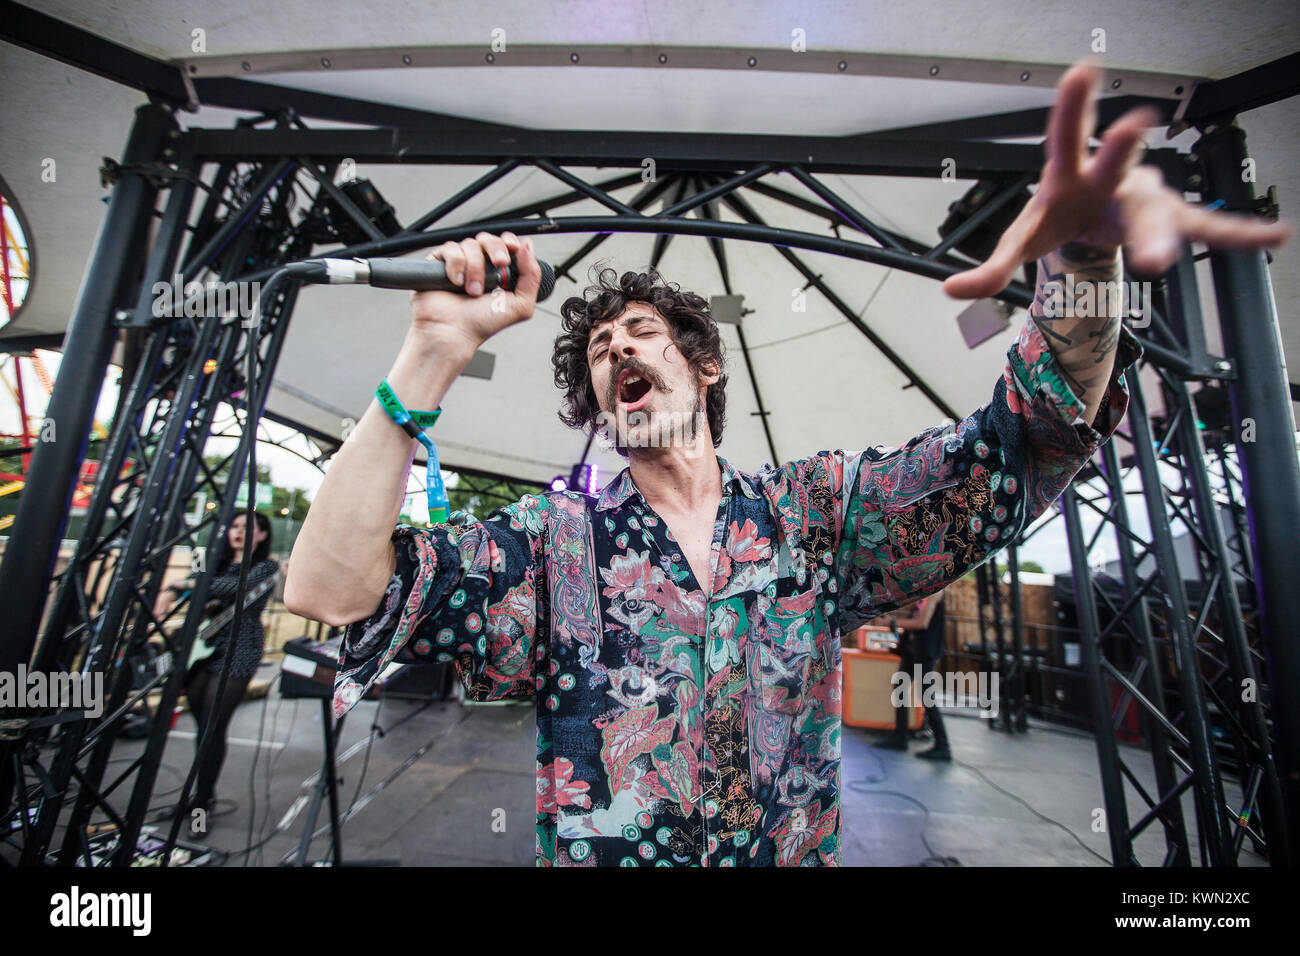 The English hard rock band Turbowolf performs a live concert at the Summer Stage at the Barclaycard British Summer Time festival 2014 at Hyde Park, London. Here vocalist Chris Georgiadis is pictured at the gig. UK 04.07.2014. Stock Photo